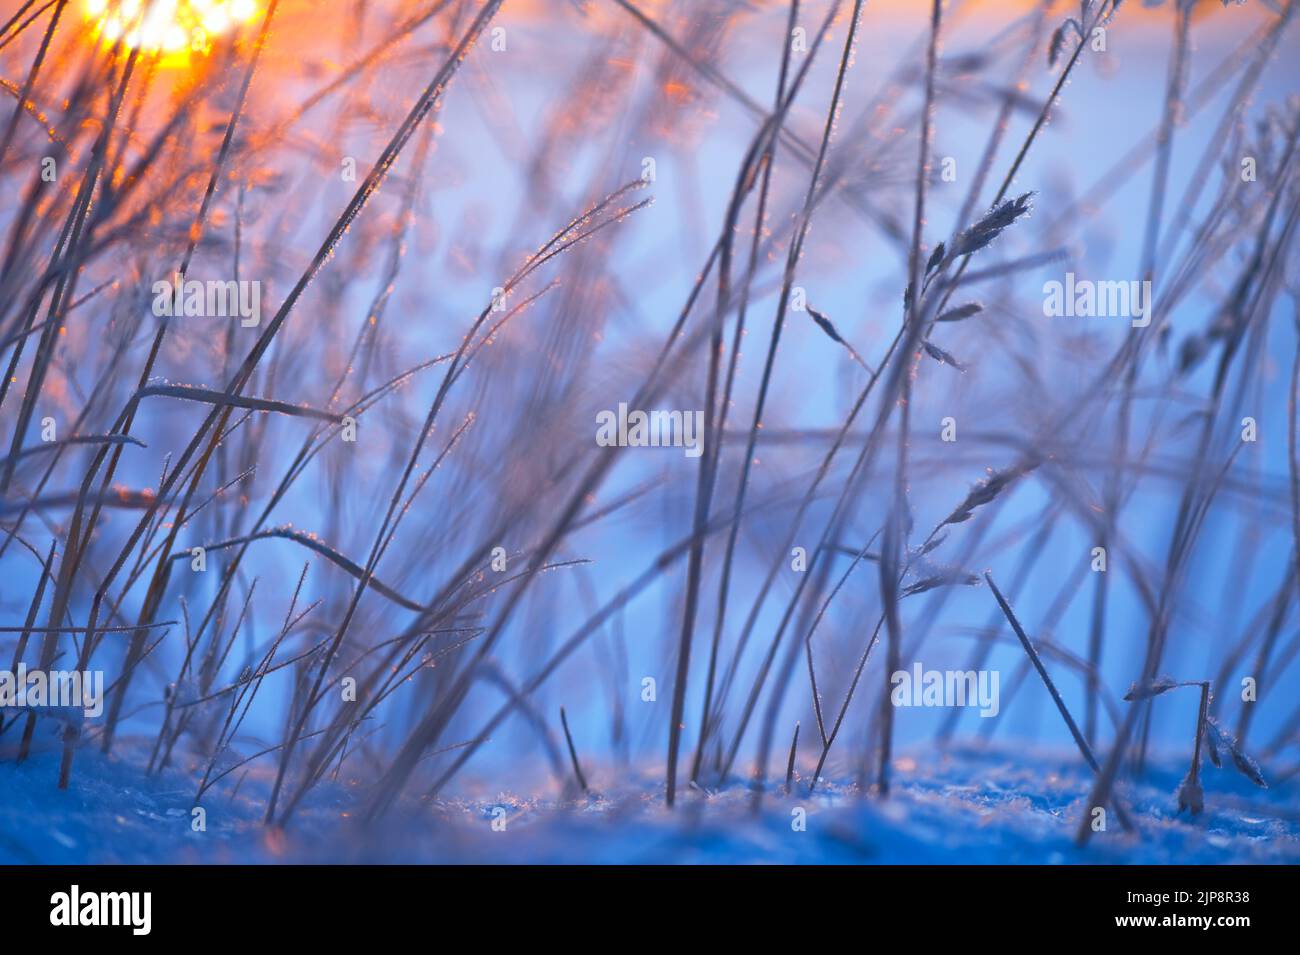 Close-up of frost covered grasses lit by low angle sun. Selective focus and shallow depth of field. Stock Photo